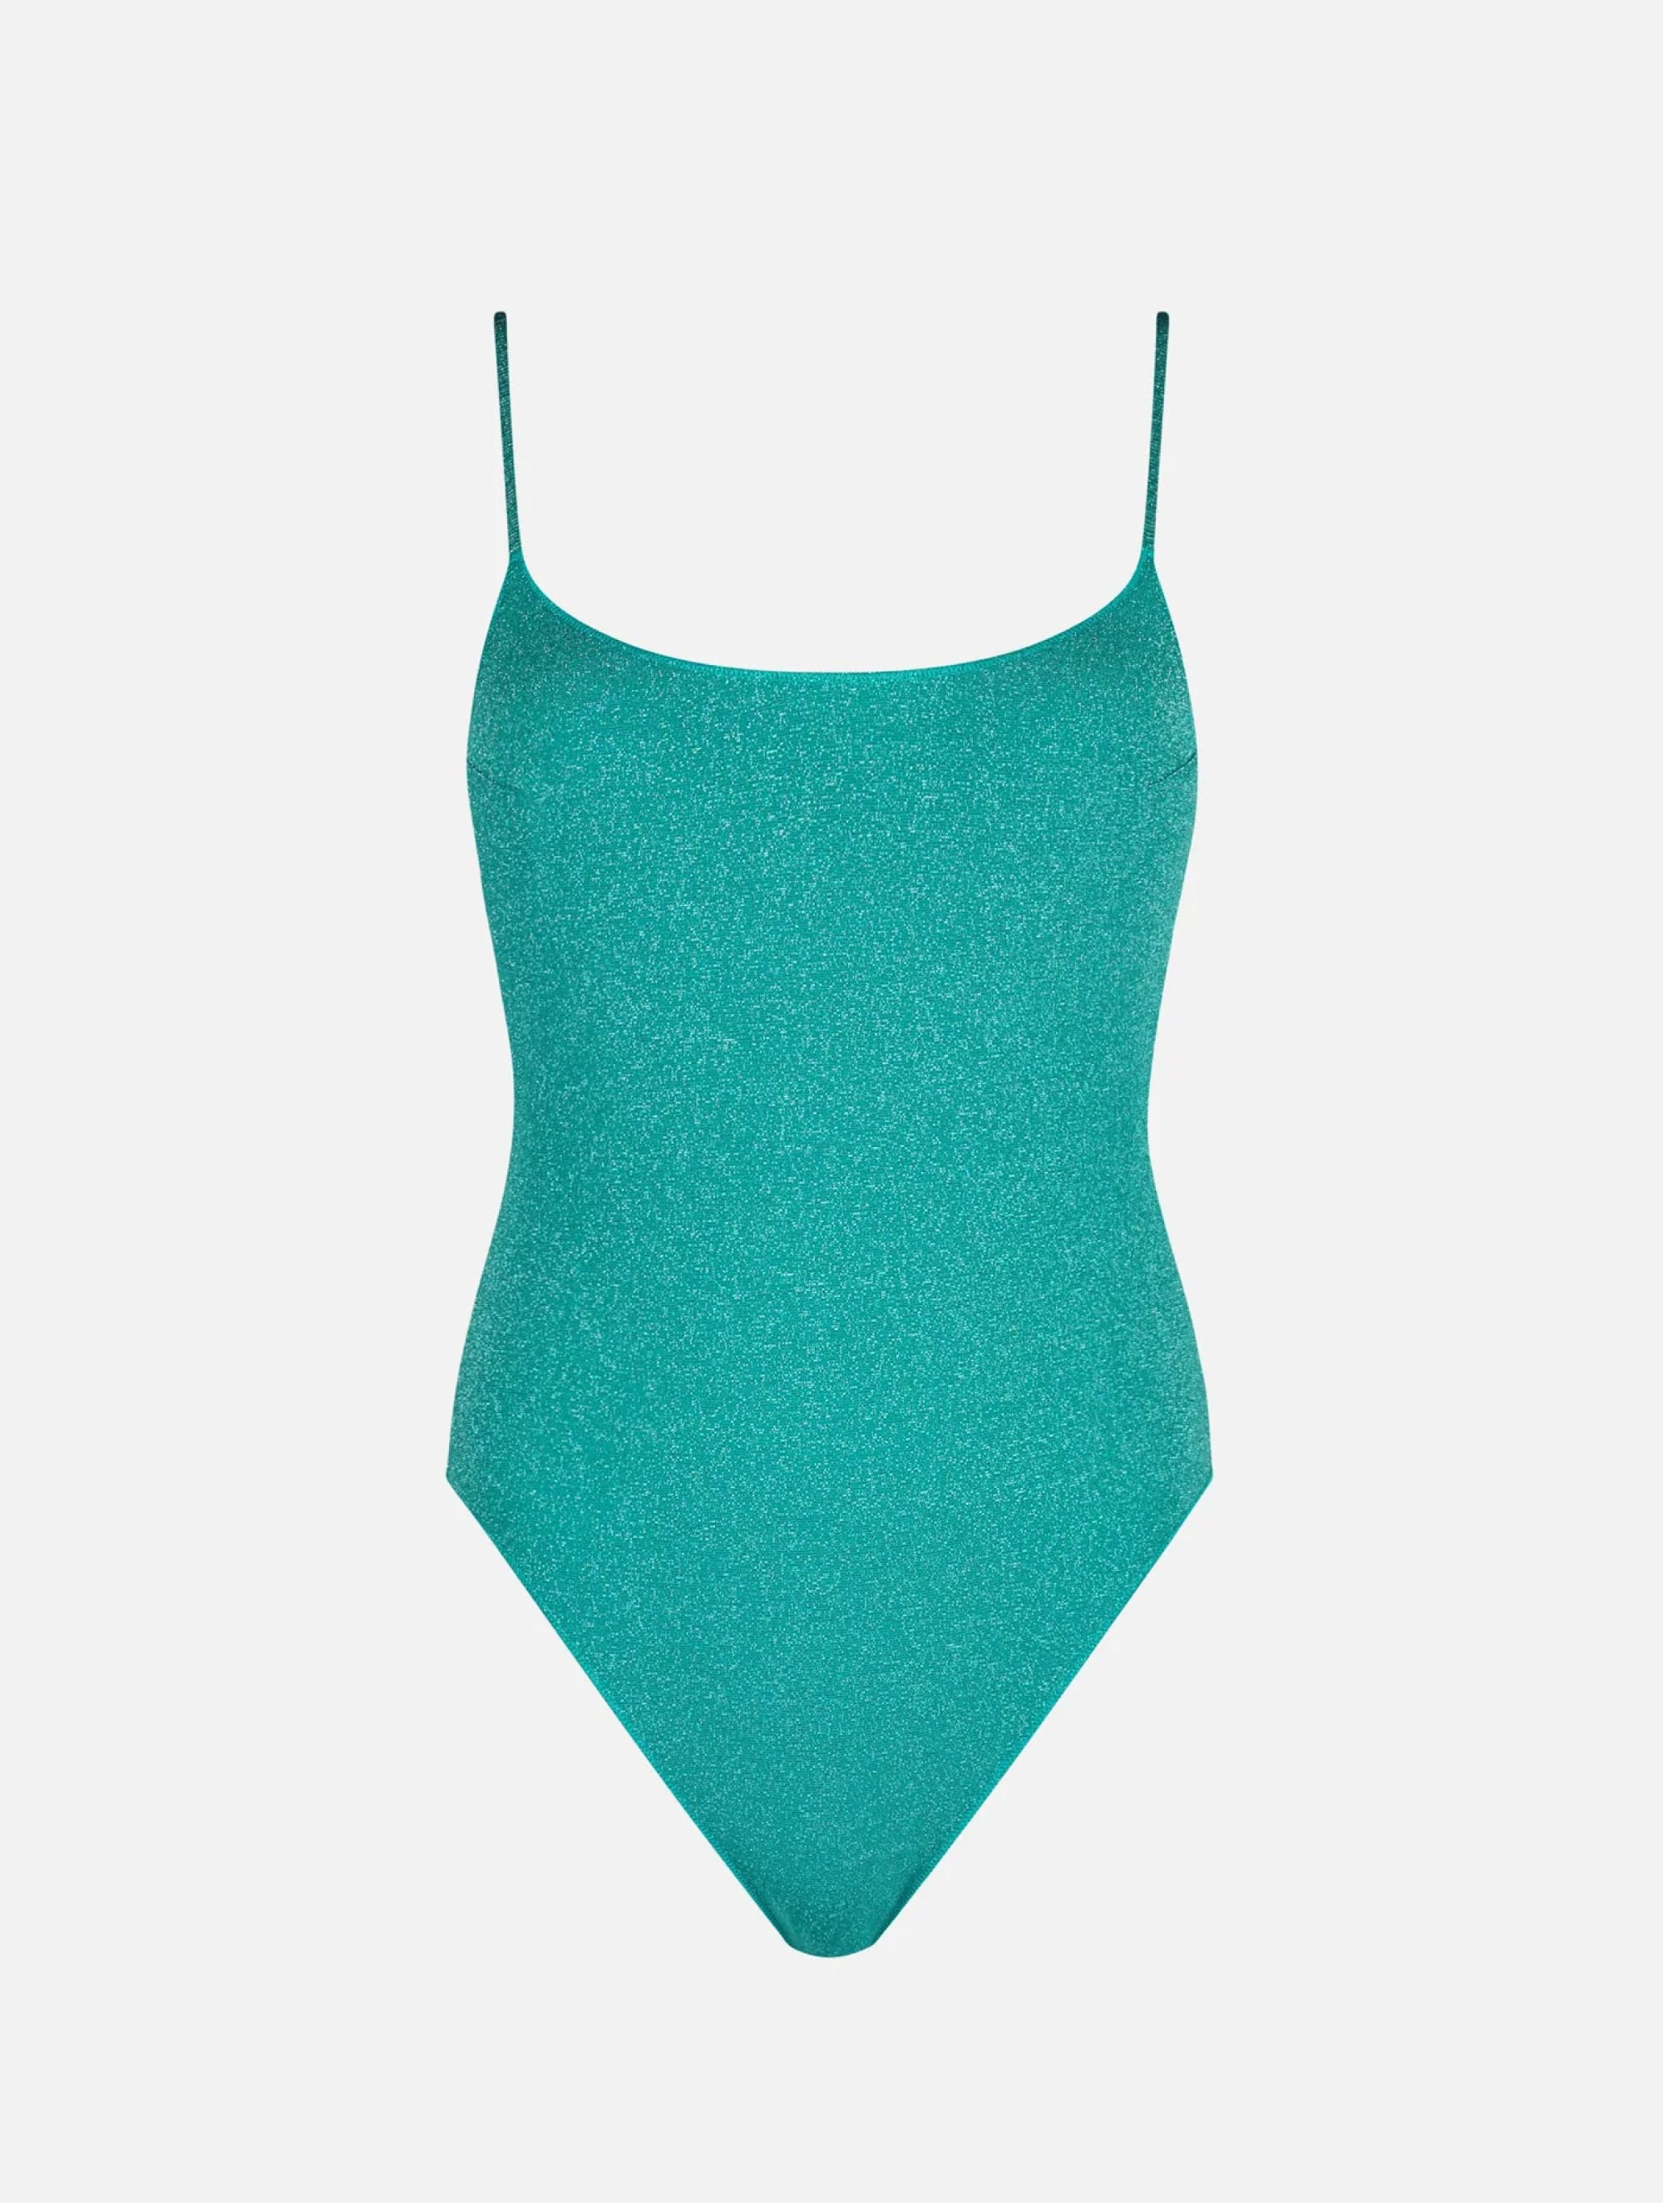 One-piece swimsuit with thin straps in green Lurex